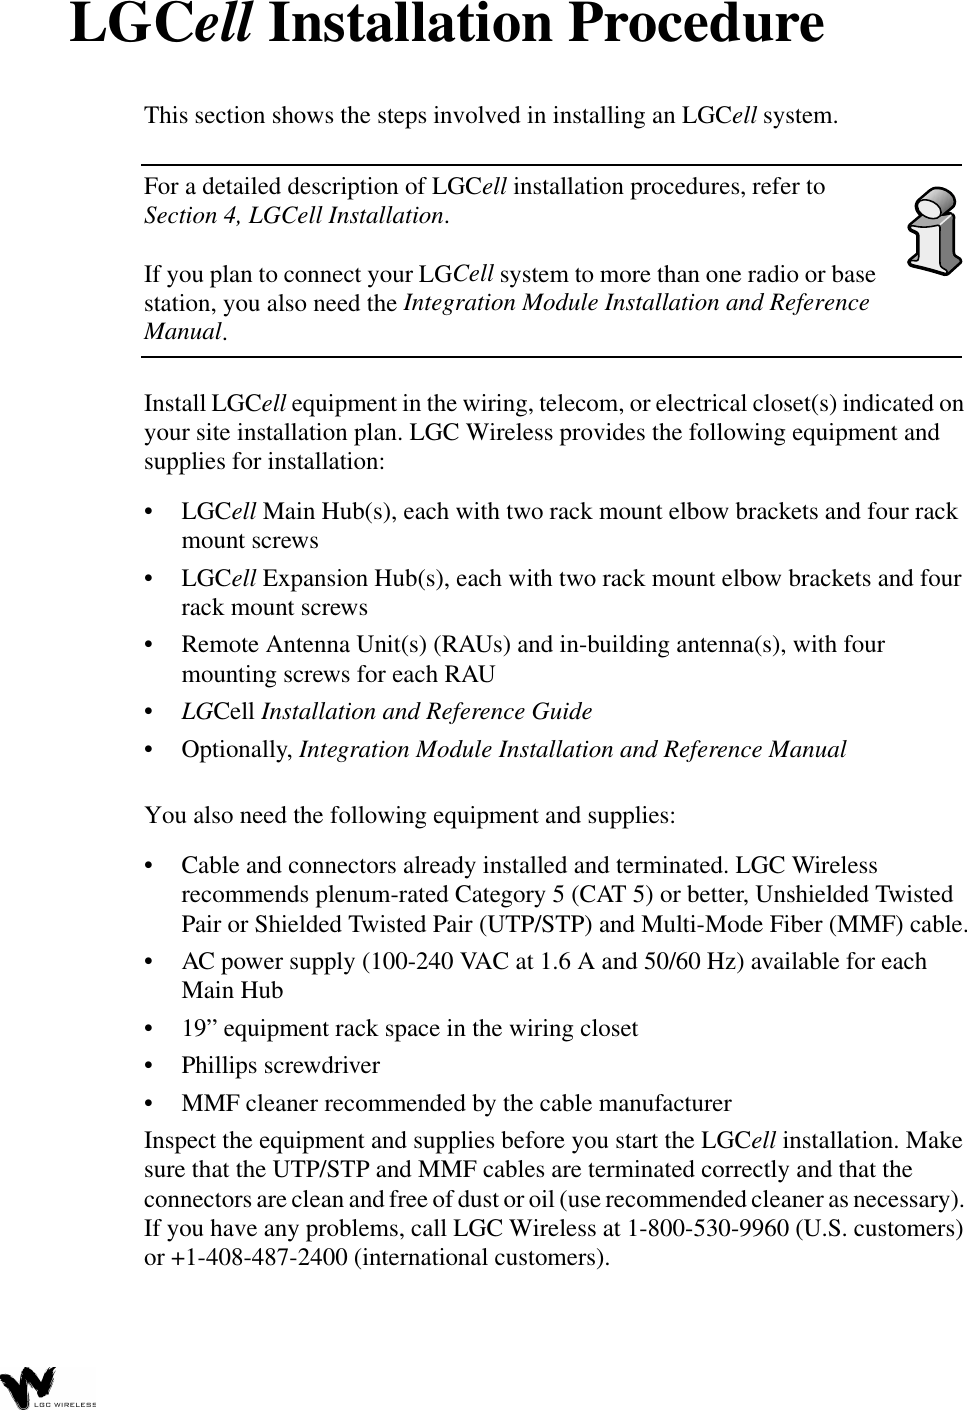 LGCell Installation ProcedureThis section shows the steps involved in installing an LGCell system.For a detailed description of LGCell installation procedures, refer to Section 4, LGCell Installation. If you plan to connect your LGCell system to more than one radio or base station, you also need the Integration Module Installation and Reference Manual. Install LGCell equipment in the wiring, telecom, or electrical closet(s) indicated on your site installation plan. LGC Wireless provides the following equipment and supplies for installation:• LGCell Main Hub(s), each with two rack mount elbow brackets and four rack mount screws• LGCell Expansion Hub(s), each with two rack mount elbow brackets and four rack mount screws• Remote Antenna Unit(s) (RAUs) and in-building antenna(s), with four mounting screws for each RAU•LGCell Installation and Reference Guide• Optionally, Integration Module Installation and Reference ManualYou also need the following equipment and supplies:• Cable and connectors already installed and terminated. LGC Wireless recommends plenum-rated Category 5 (CAT 5) or better, Unshielded Twisted Pair or Shielded Twisted Pair (UTP/STP) and Multi-Mode Fiber (MMF) cable.• AC power supply (100-240 VAC at 1.6 A and 50/60 Hz) available for each Main Hub• 19” equipment rack space in the wiring closet• Phillips screwdriver• MMF cleaner recommended by the cable manufacturerInspect the equipment and supplies before you start the LGCell installation. Make sure that the UTP/STP and MMF cables are terminated correctly and that the connectors are clean and free of dust or oil (use recommended cleaner as necessary). If you have any problems, call LGC Wireless at 1-800-530-9960 (U.S. customers) or +1-408-487-2400 (international customers).